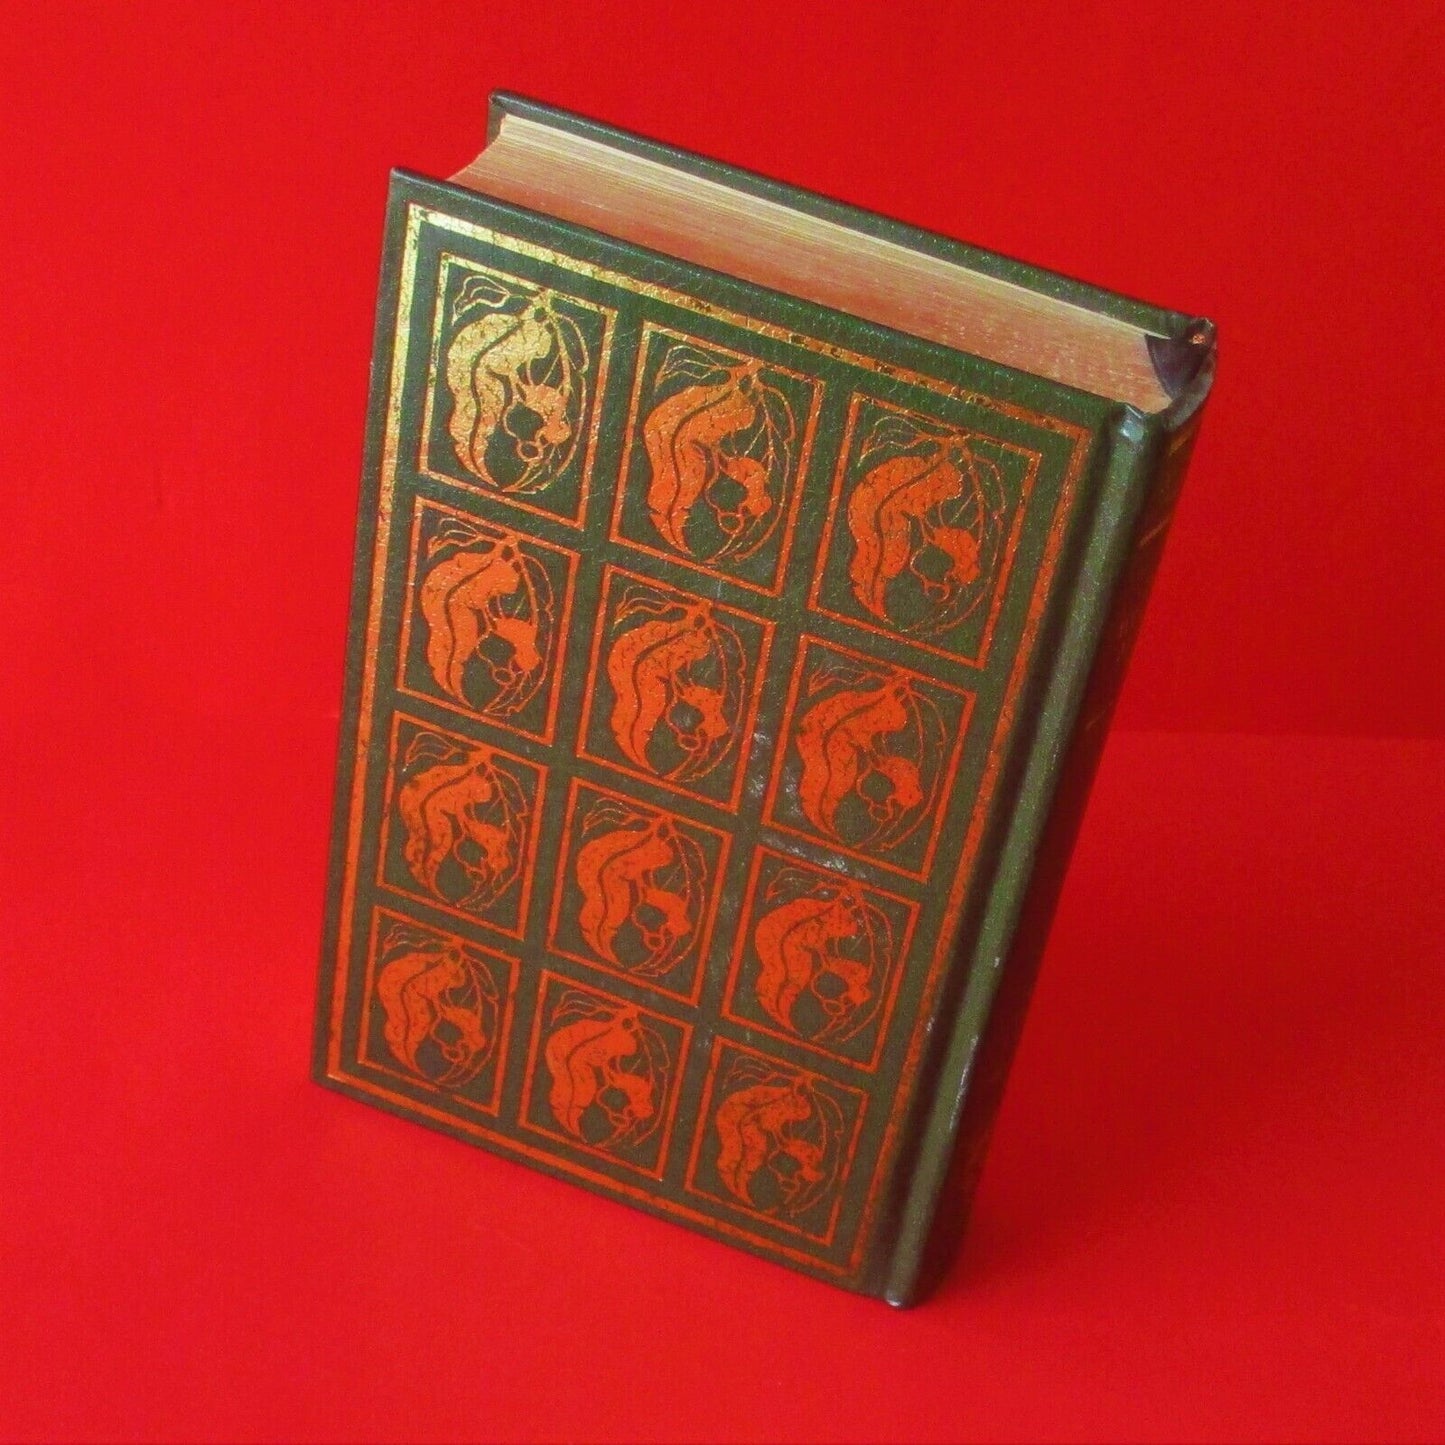 Joe Wilson’s Mates 56 Stories From The Prose Work Of Henry Lawson Hardcover